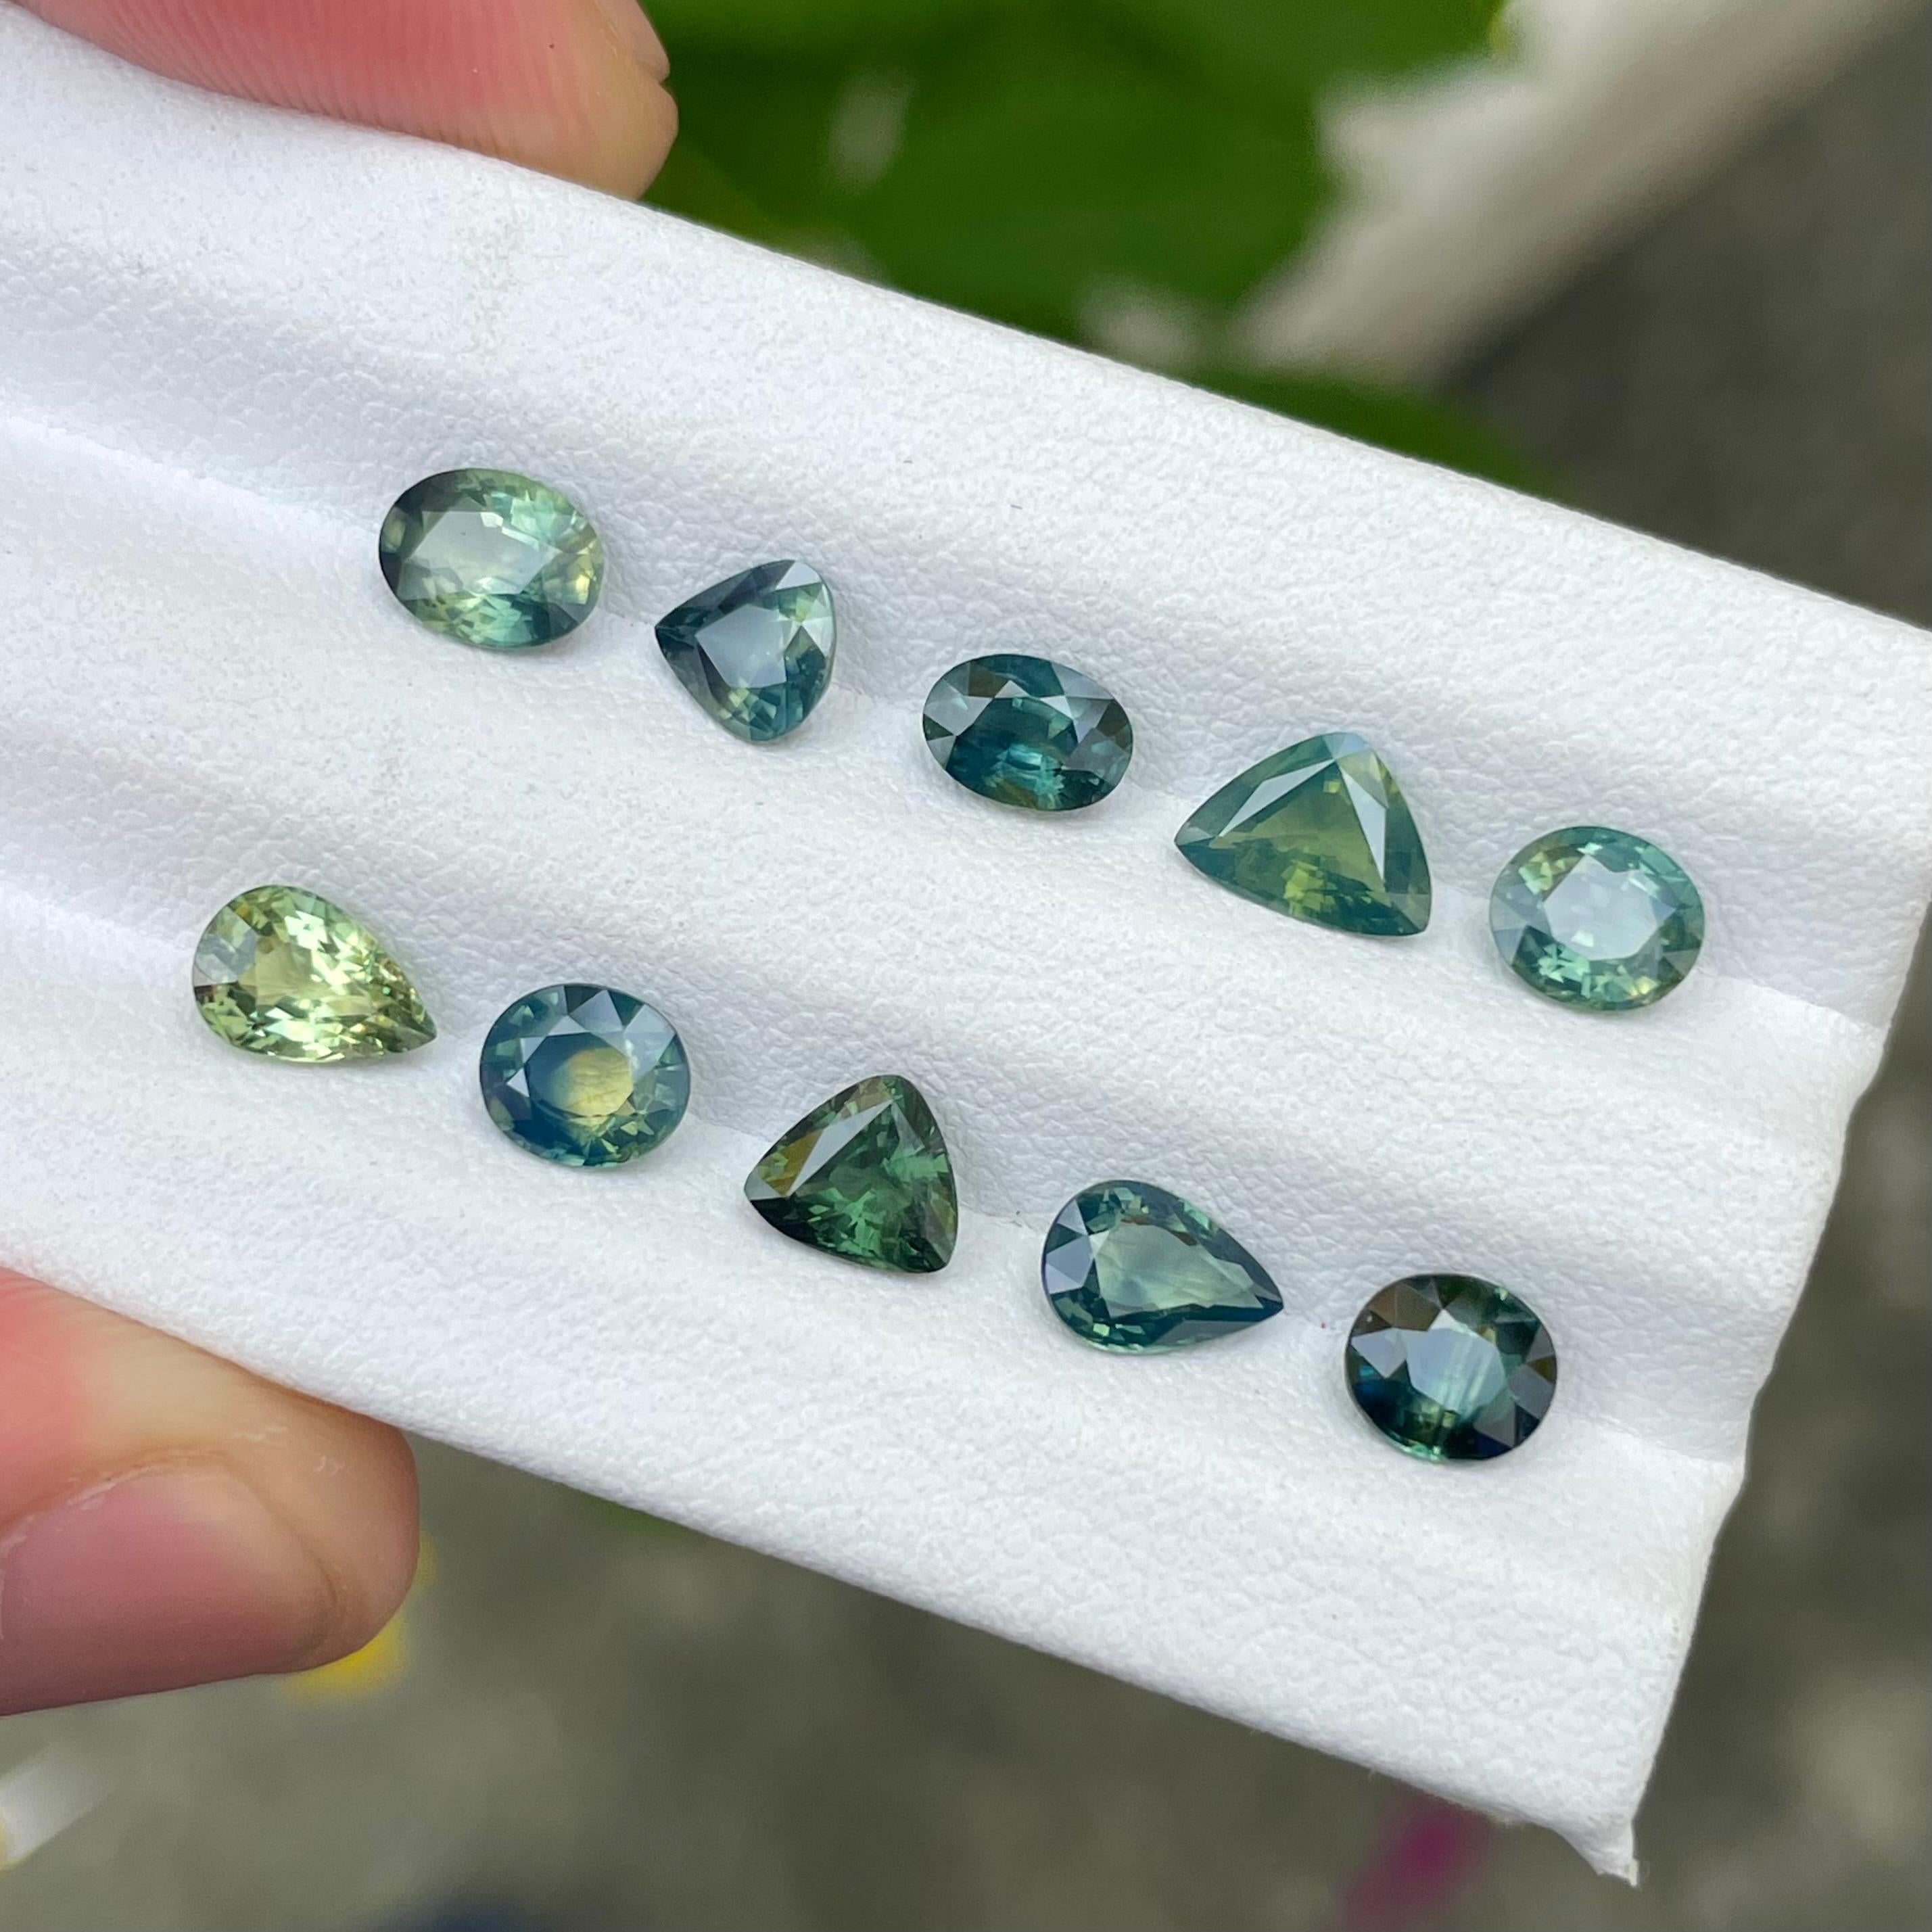 Weight 7.30 carats 
No of pieces 10
Treatment Heated 
Origin Madagascar 
Clarity VVS & Eye clean



Elevate your gemstone collection with our exquisite Parti Sapphire 10-piece lot from Madagascar. Each gemstone in this rare collection boasts 7.30